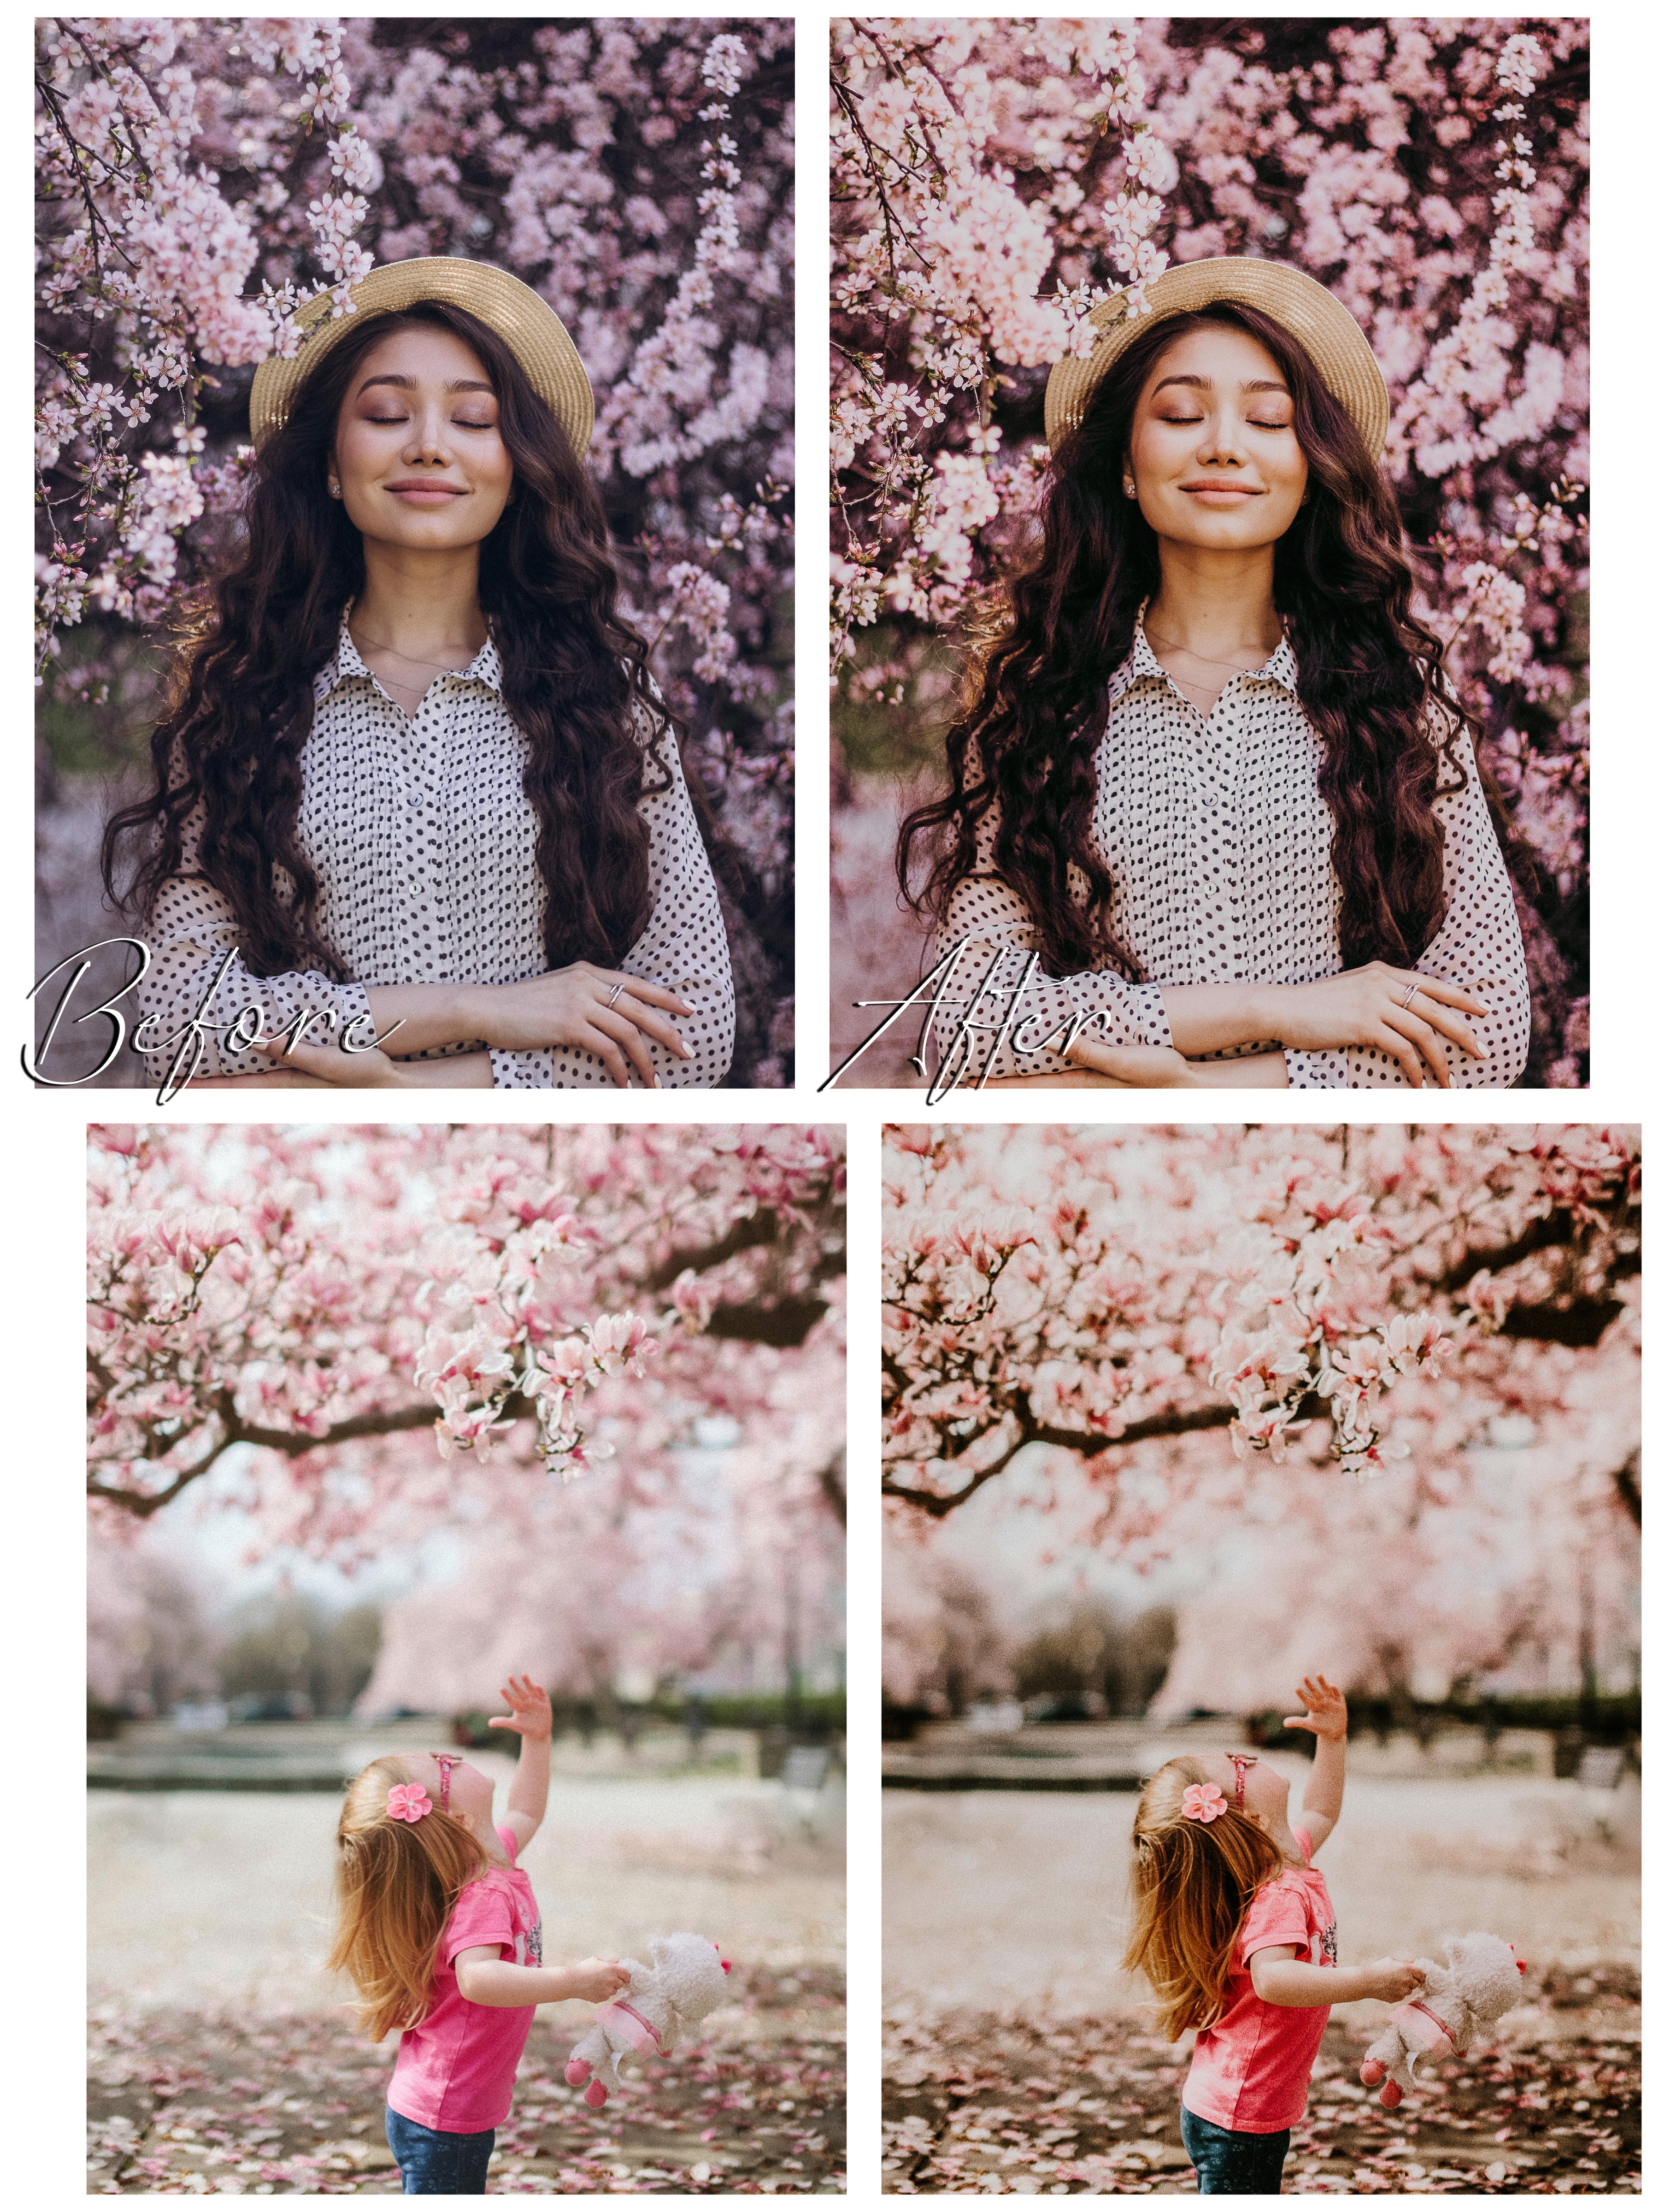 moody vibrant spring outdoor portrait photography lightroom presets 5 851